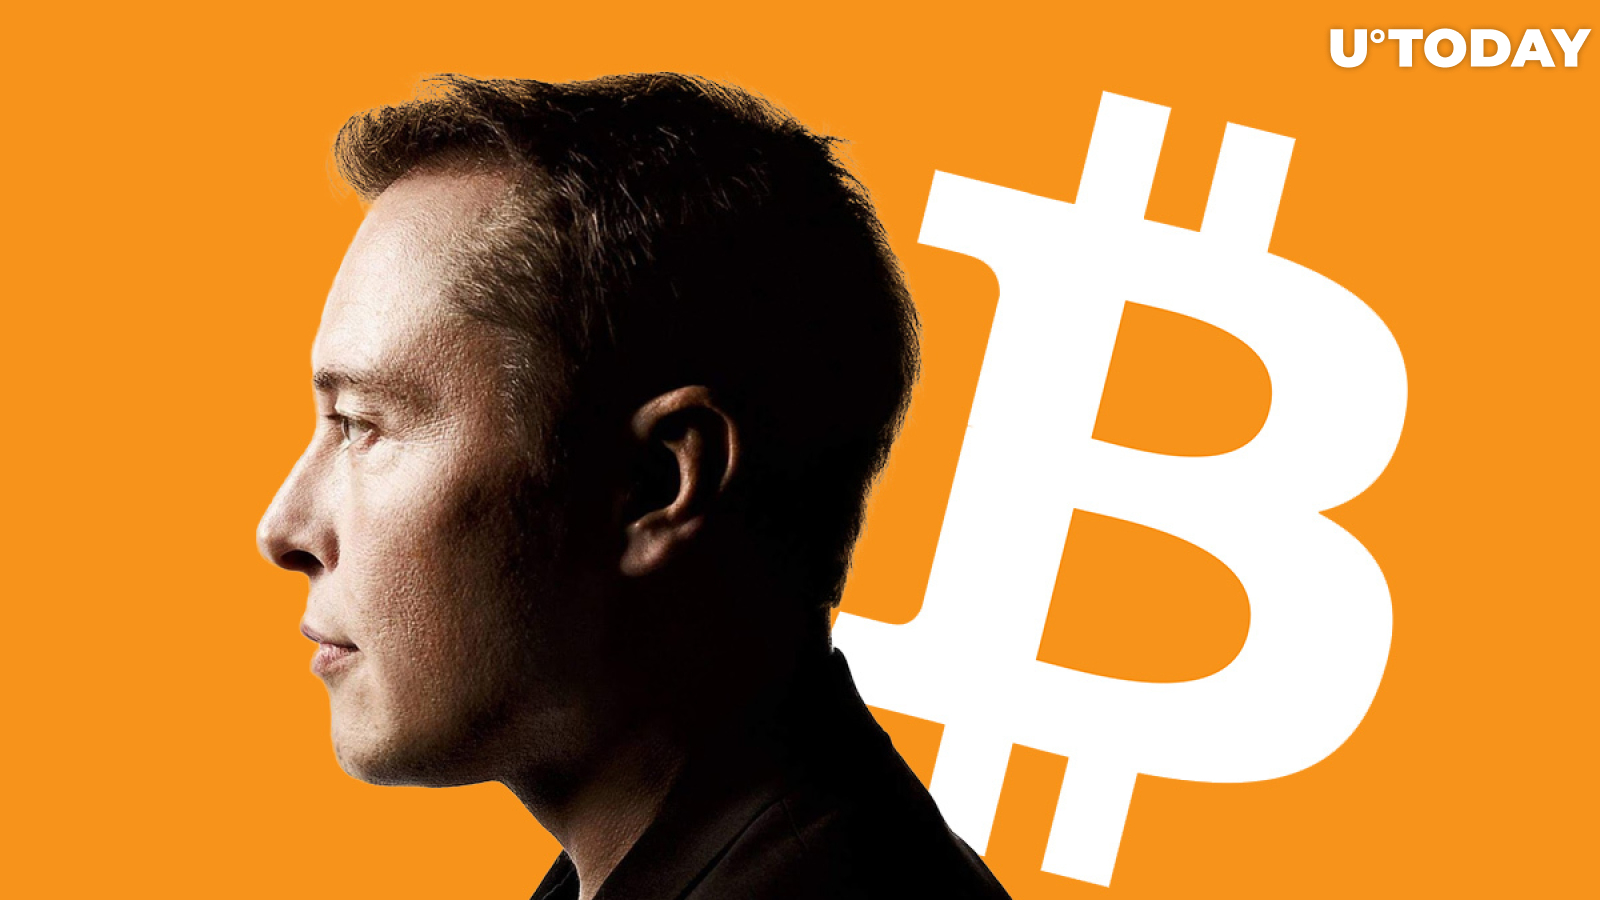 Bitcoin Fixes This: Elon Musk Slams Banks for Weak Security and High Latency